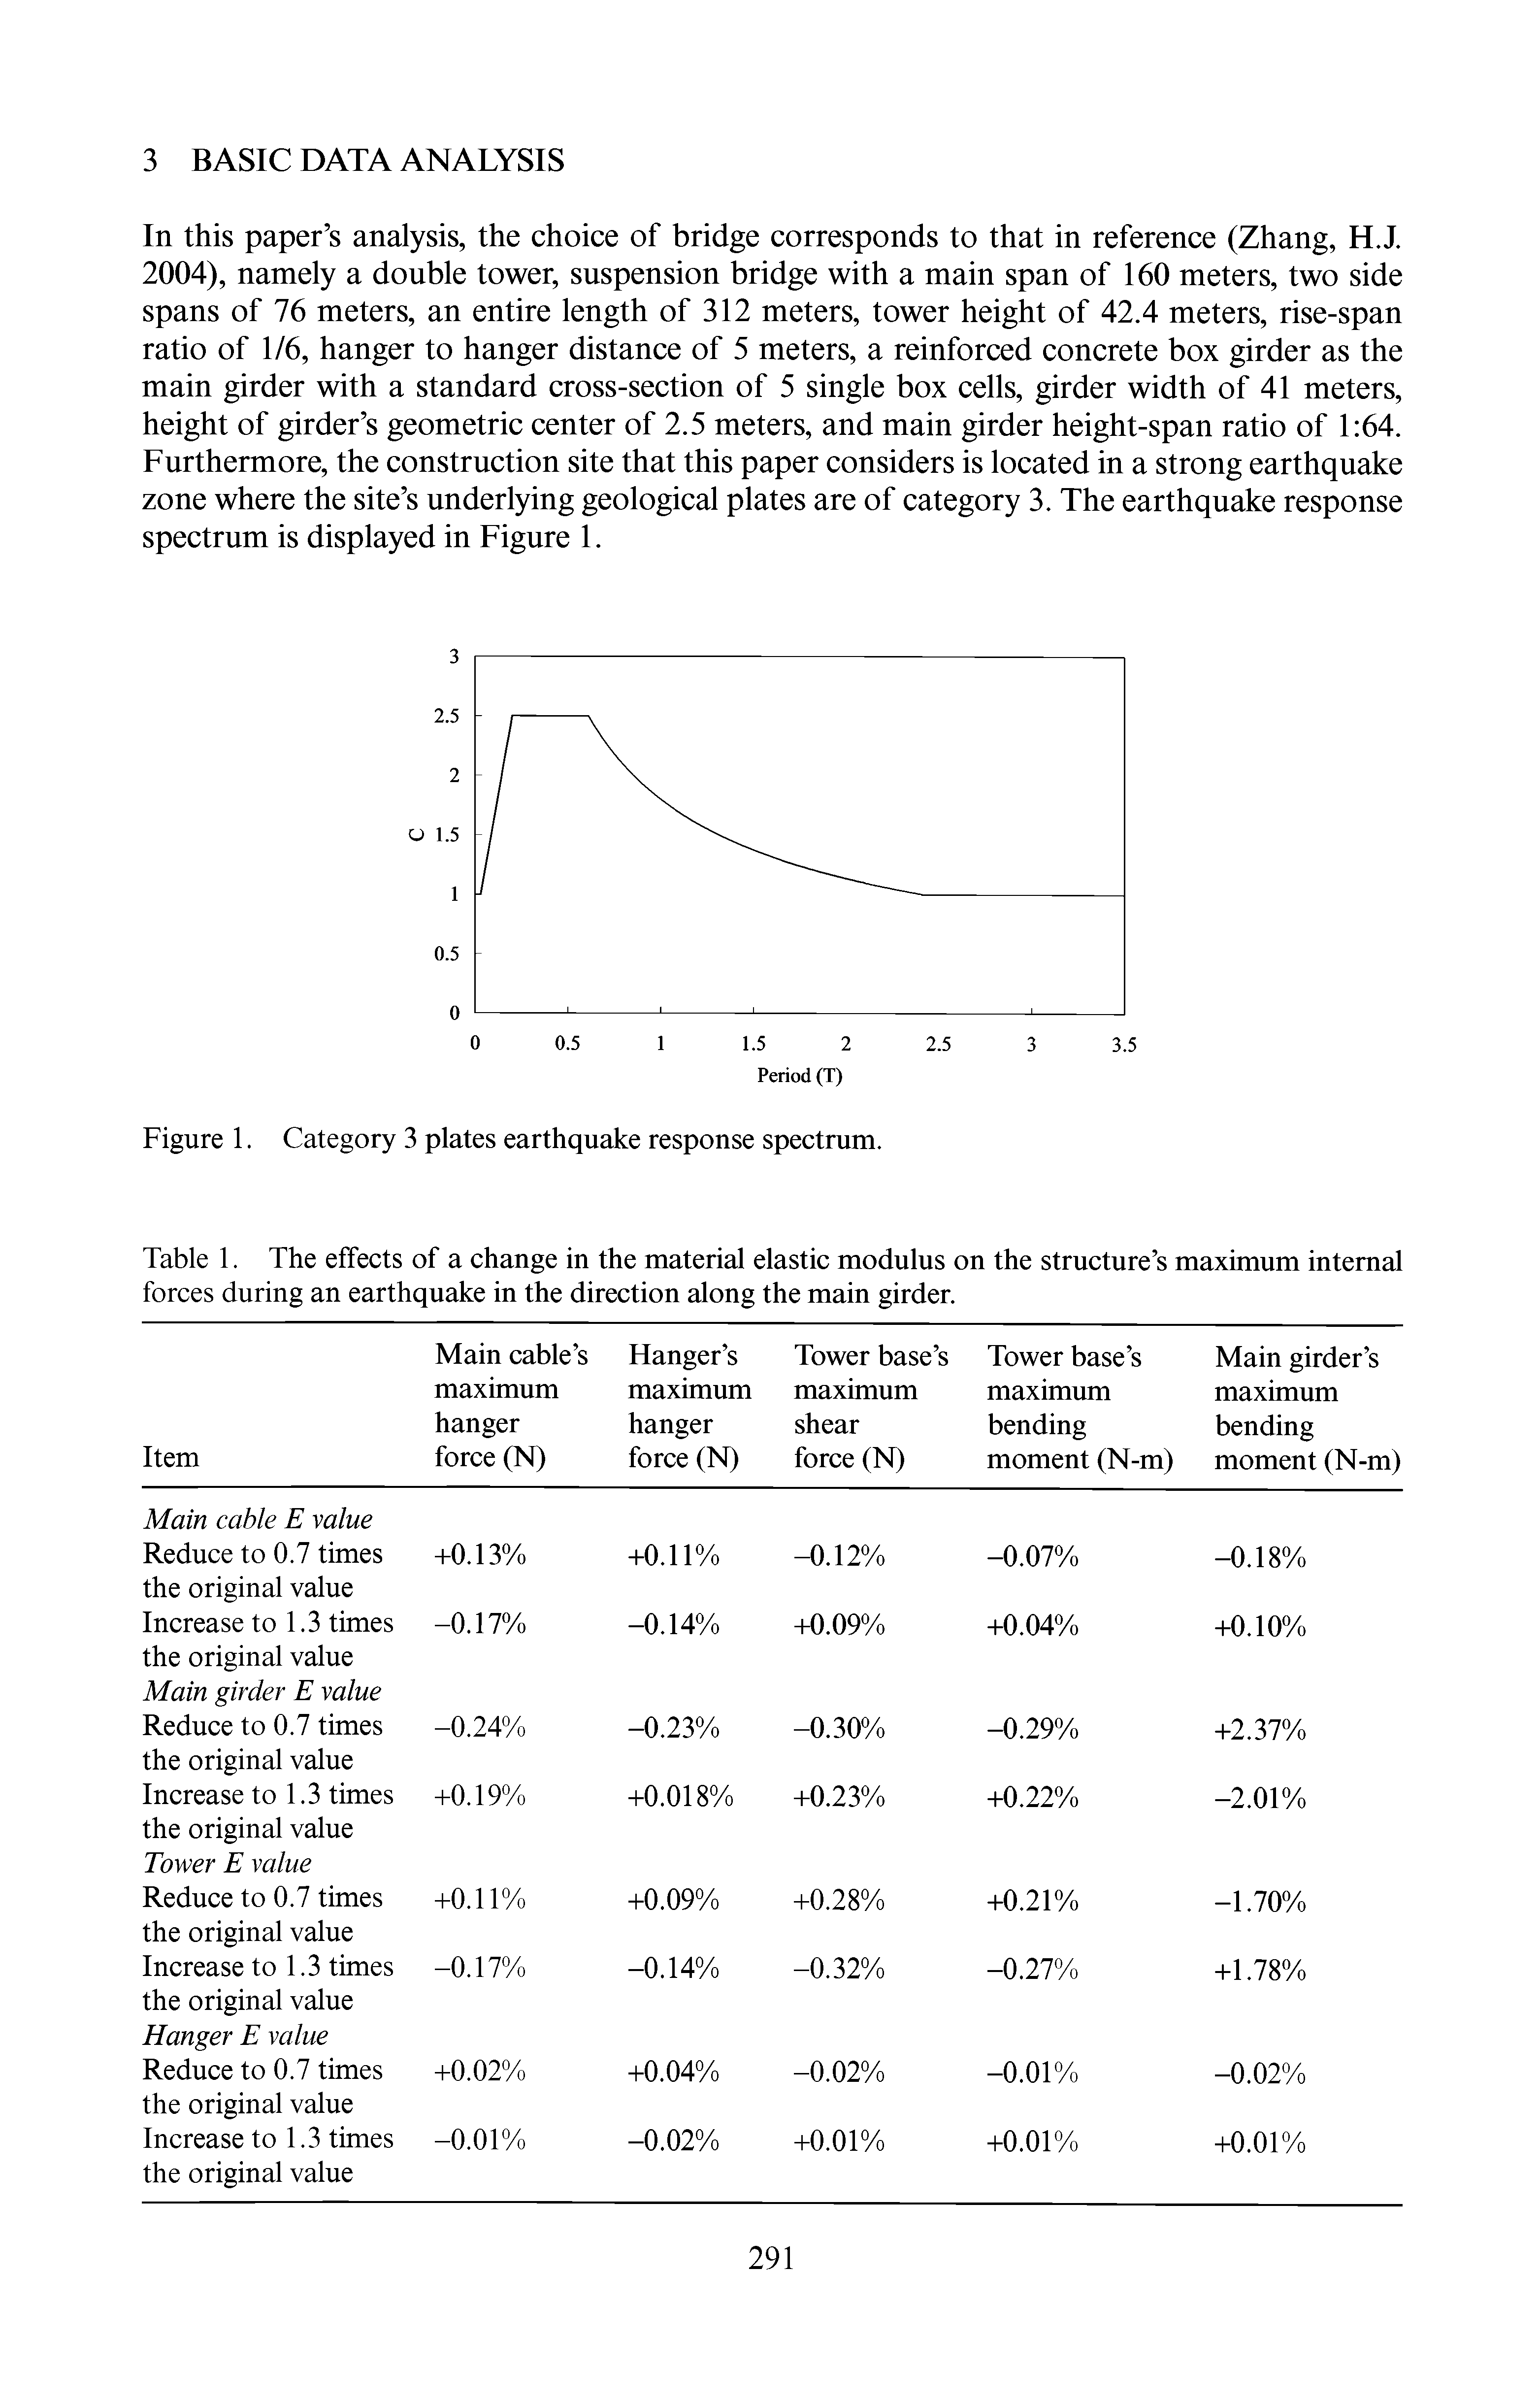 Table 1. The effects of a change in the material elastic modulus on the structure s maximum internal forces during an earthquake in the direction along the main girder.